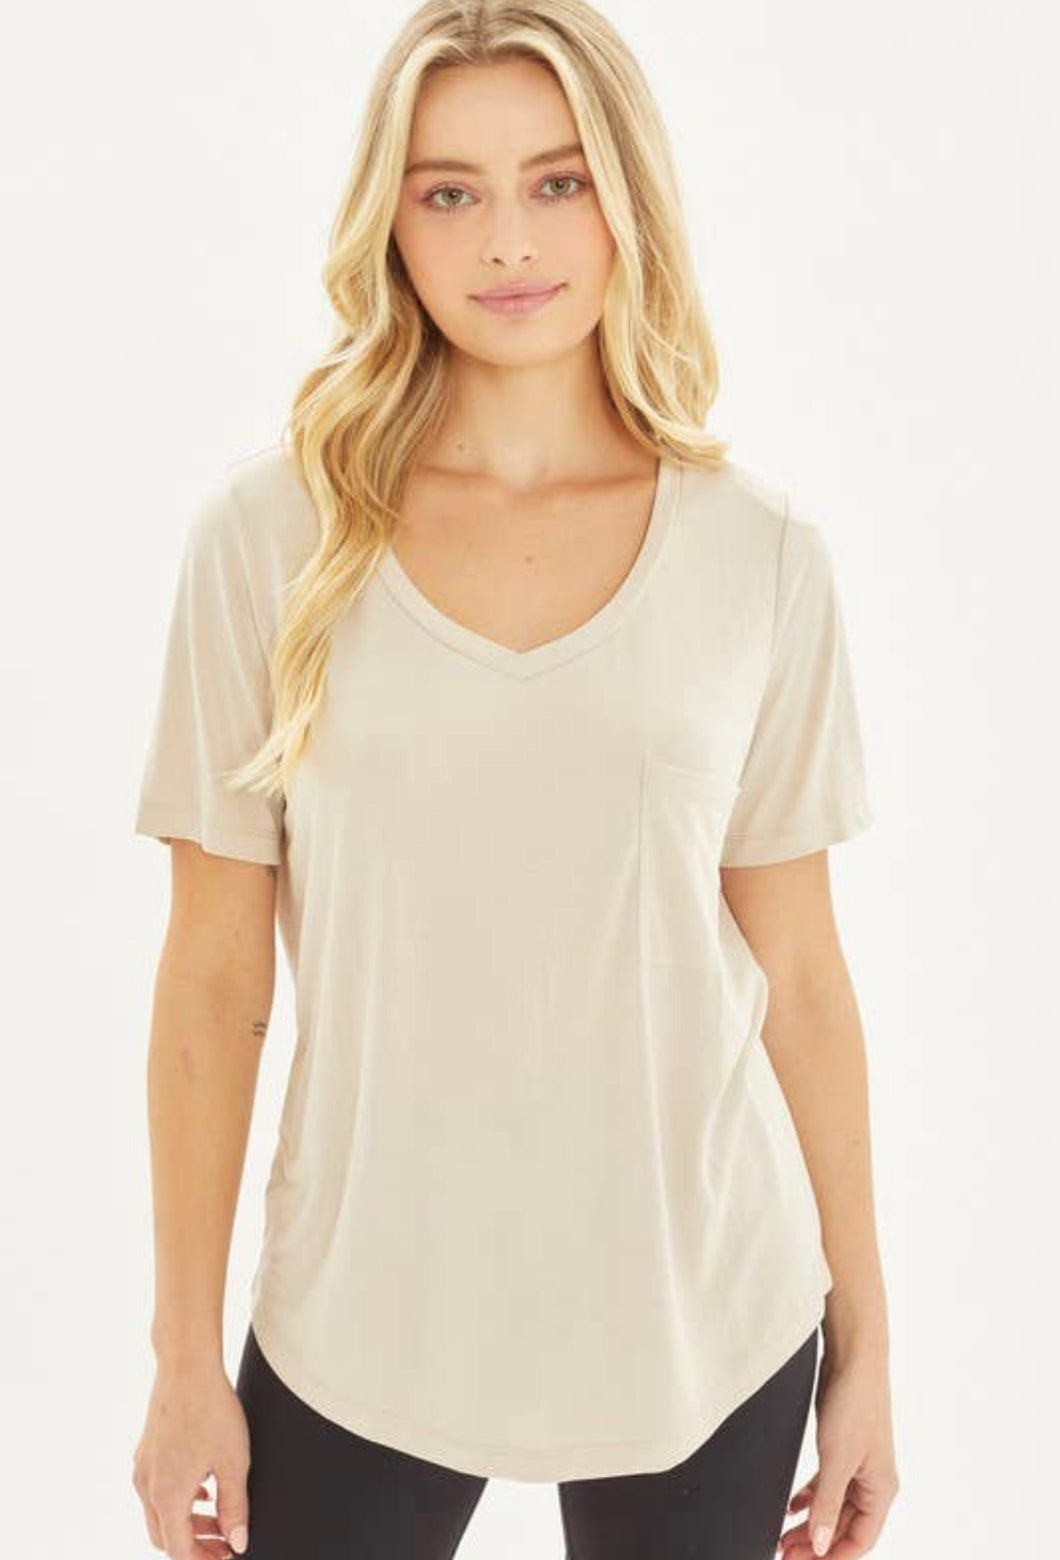 Basic Needs Knit T-Shirt in Sand